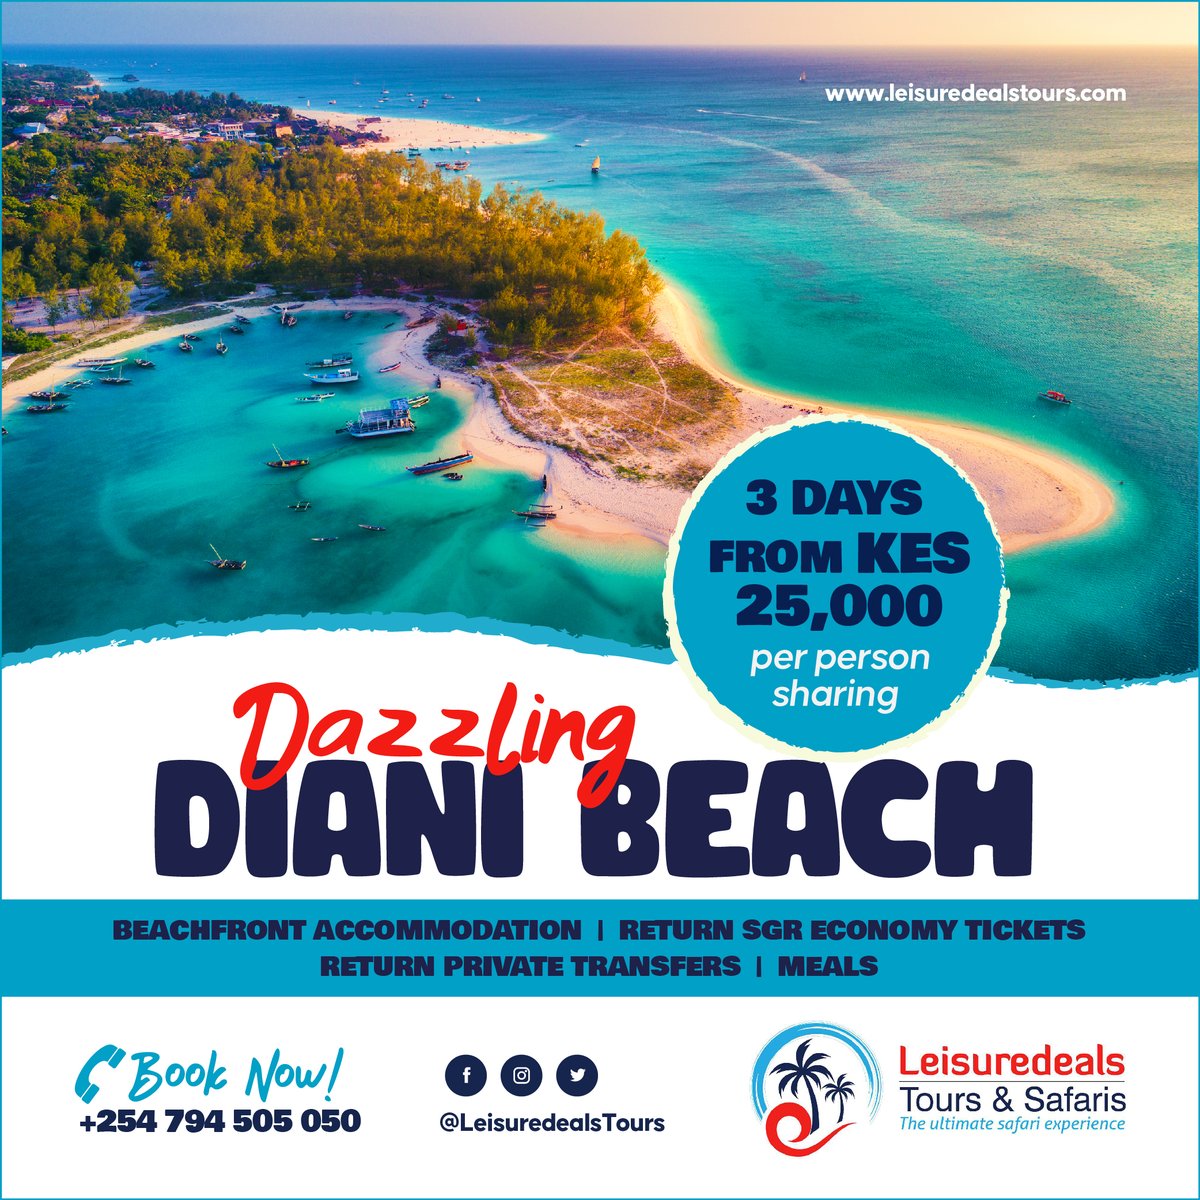 Dreaming of Diani Beach? Make it a reality with our affordable deals starting from just Ksh 25,000/-! 🌴🌊 Book now and experience paradise on a budget! #DianiBeachEscape #AffordableDeals #LeisuredealsTours #TravelGoals #BeachVacation 🏝️ #AD